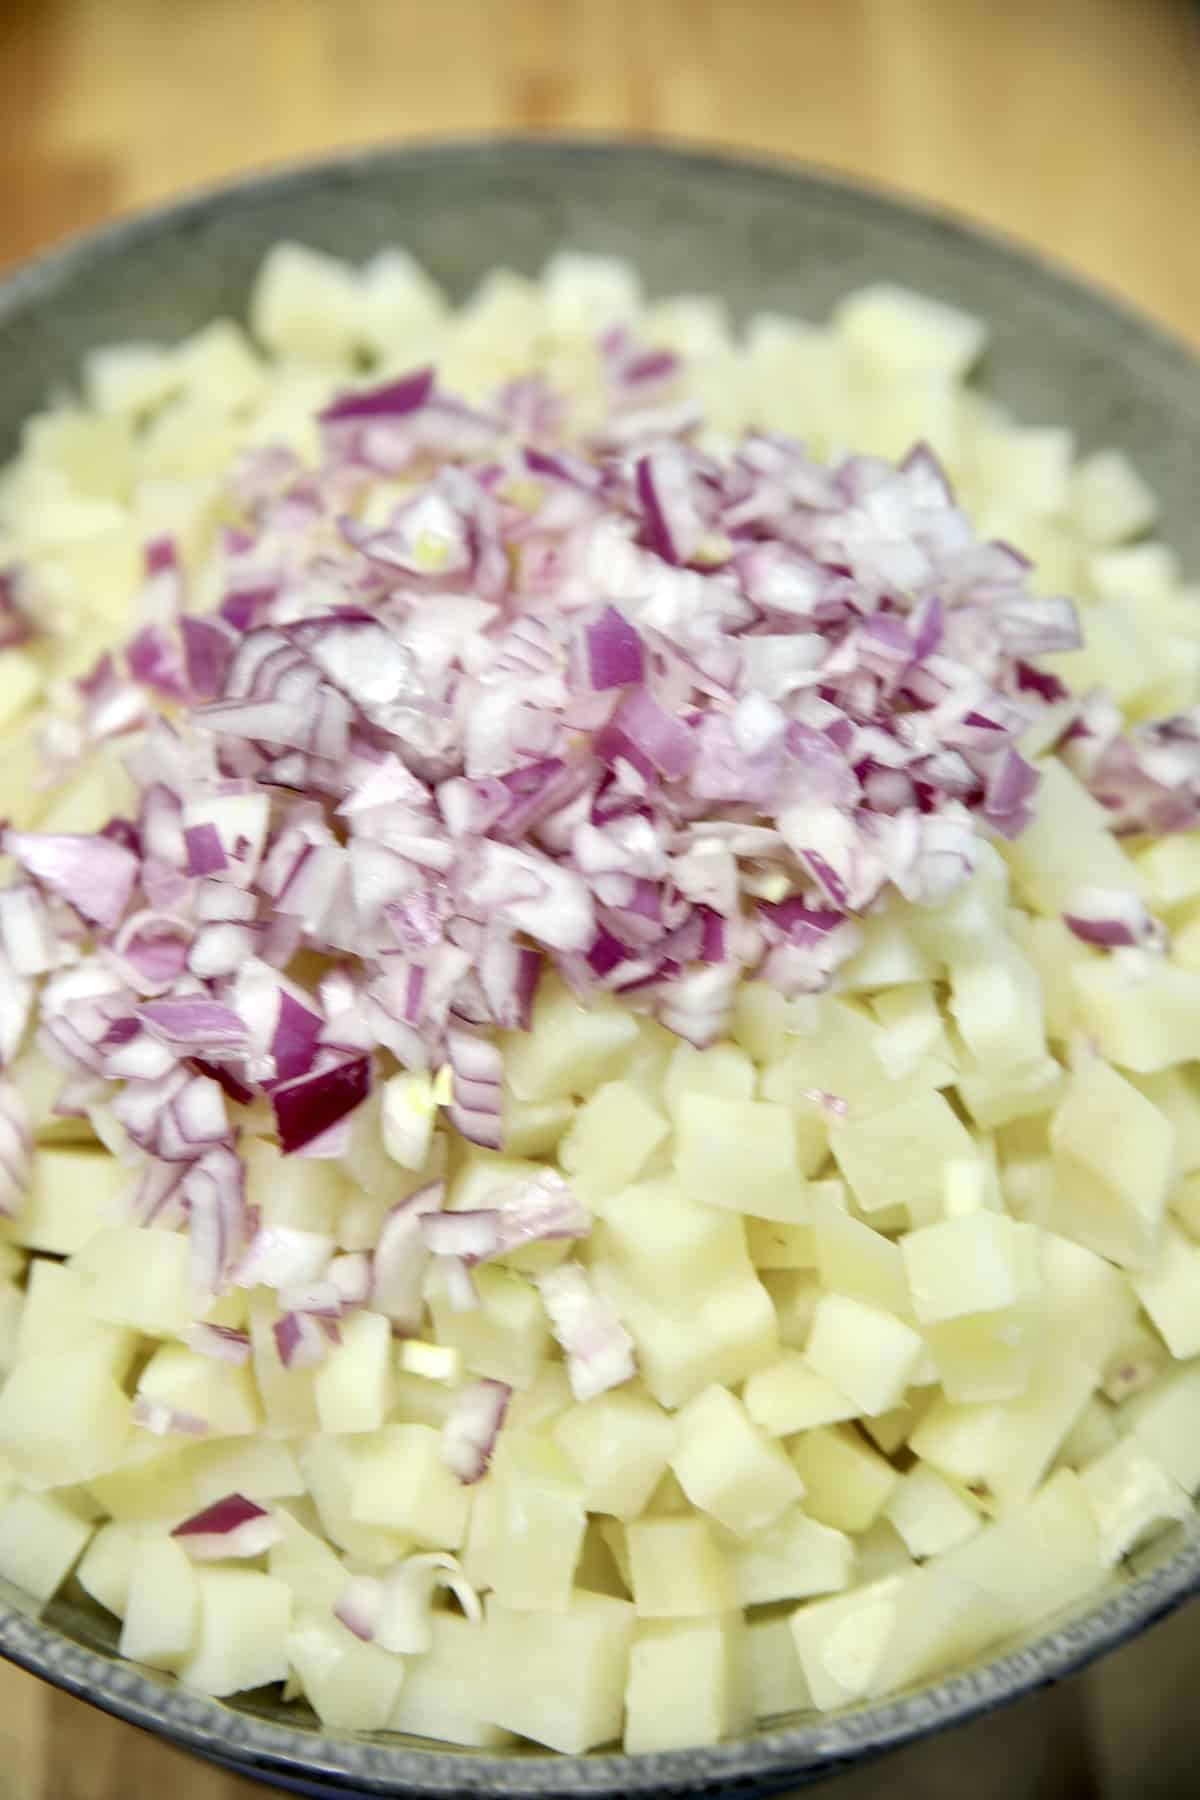 Diced potatoes in a colander with diced red onion.